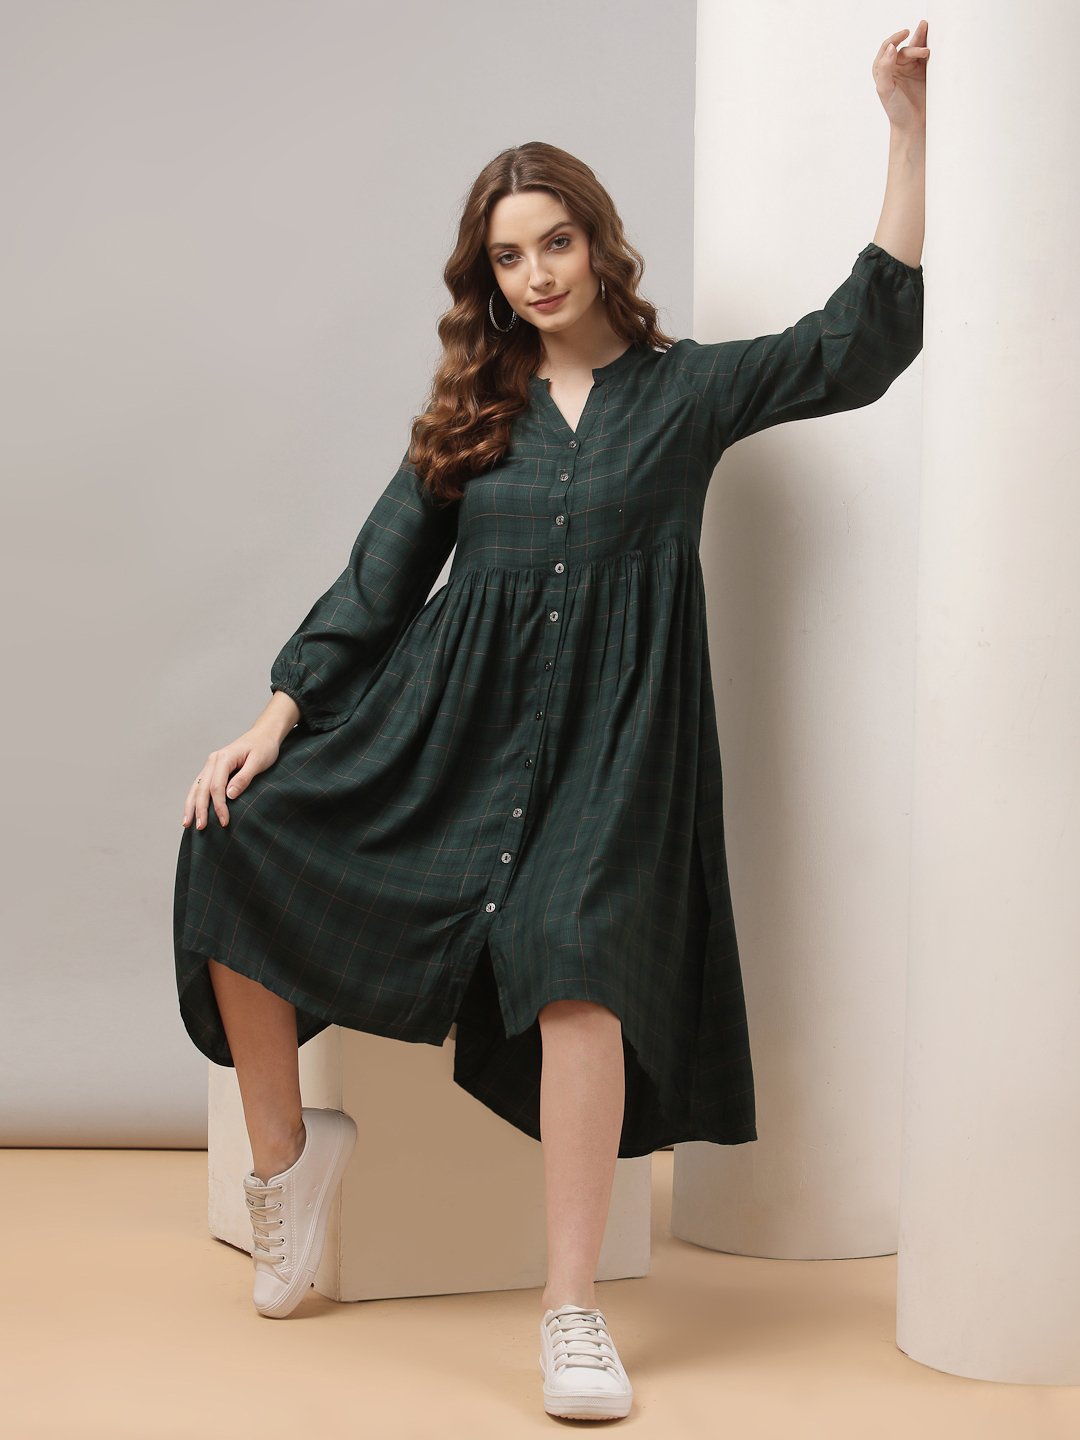 Terquois Green Checks A-Line Dress Dresses TERQUOIS   